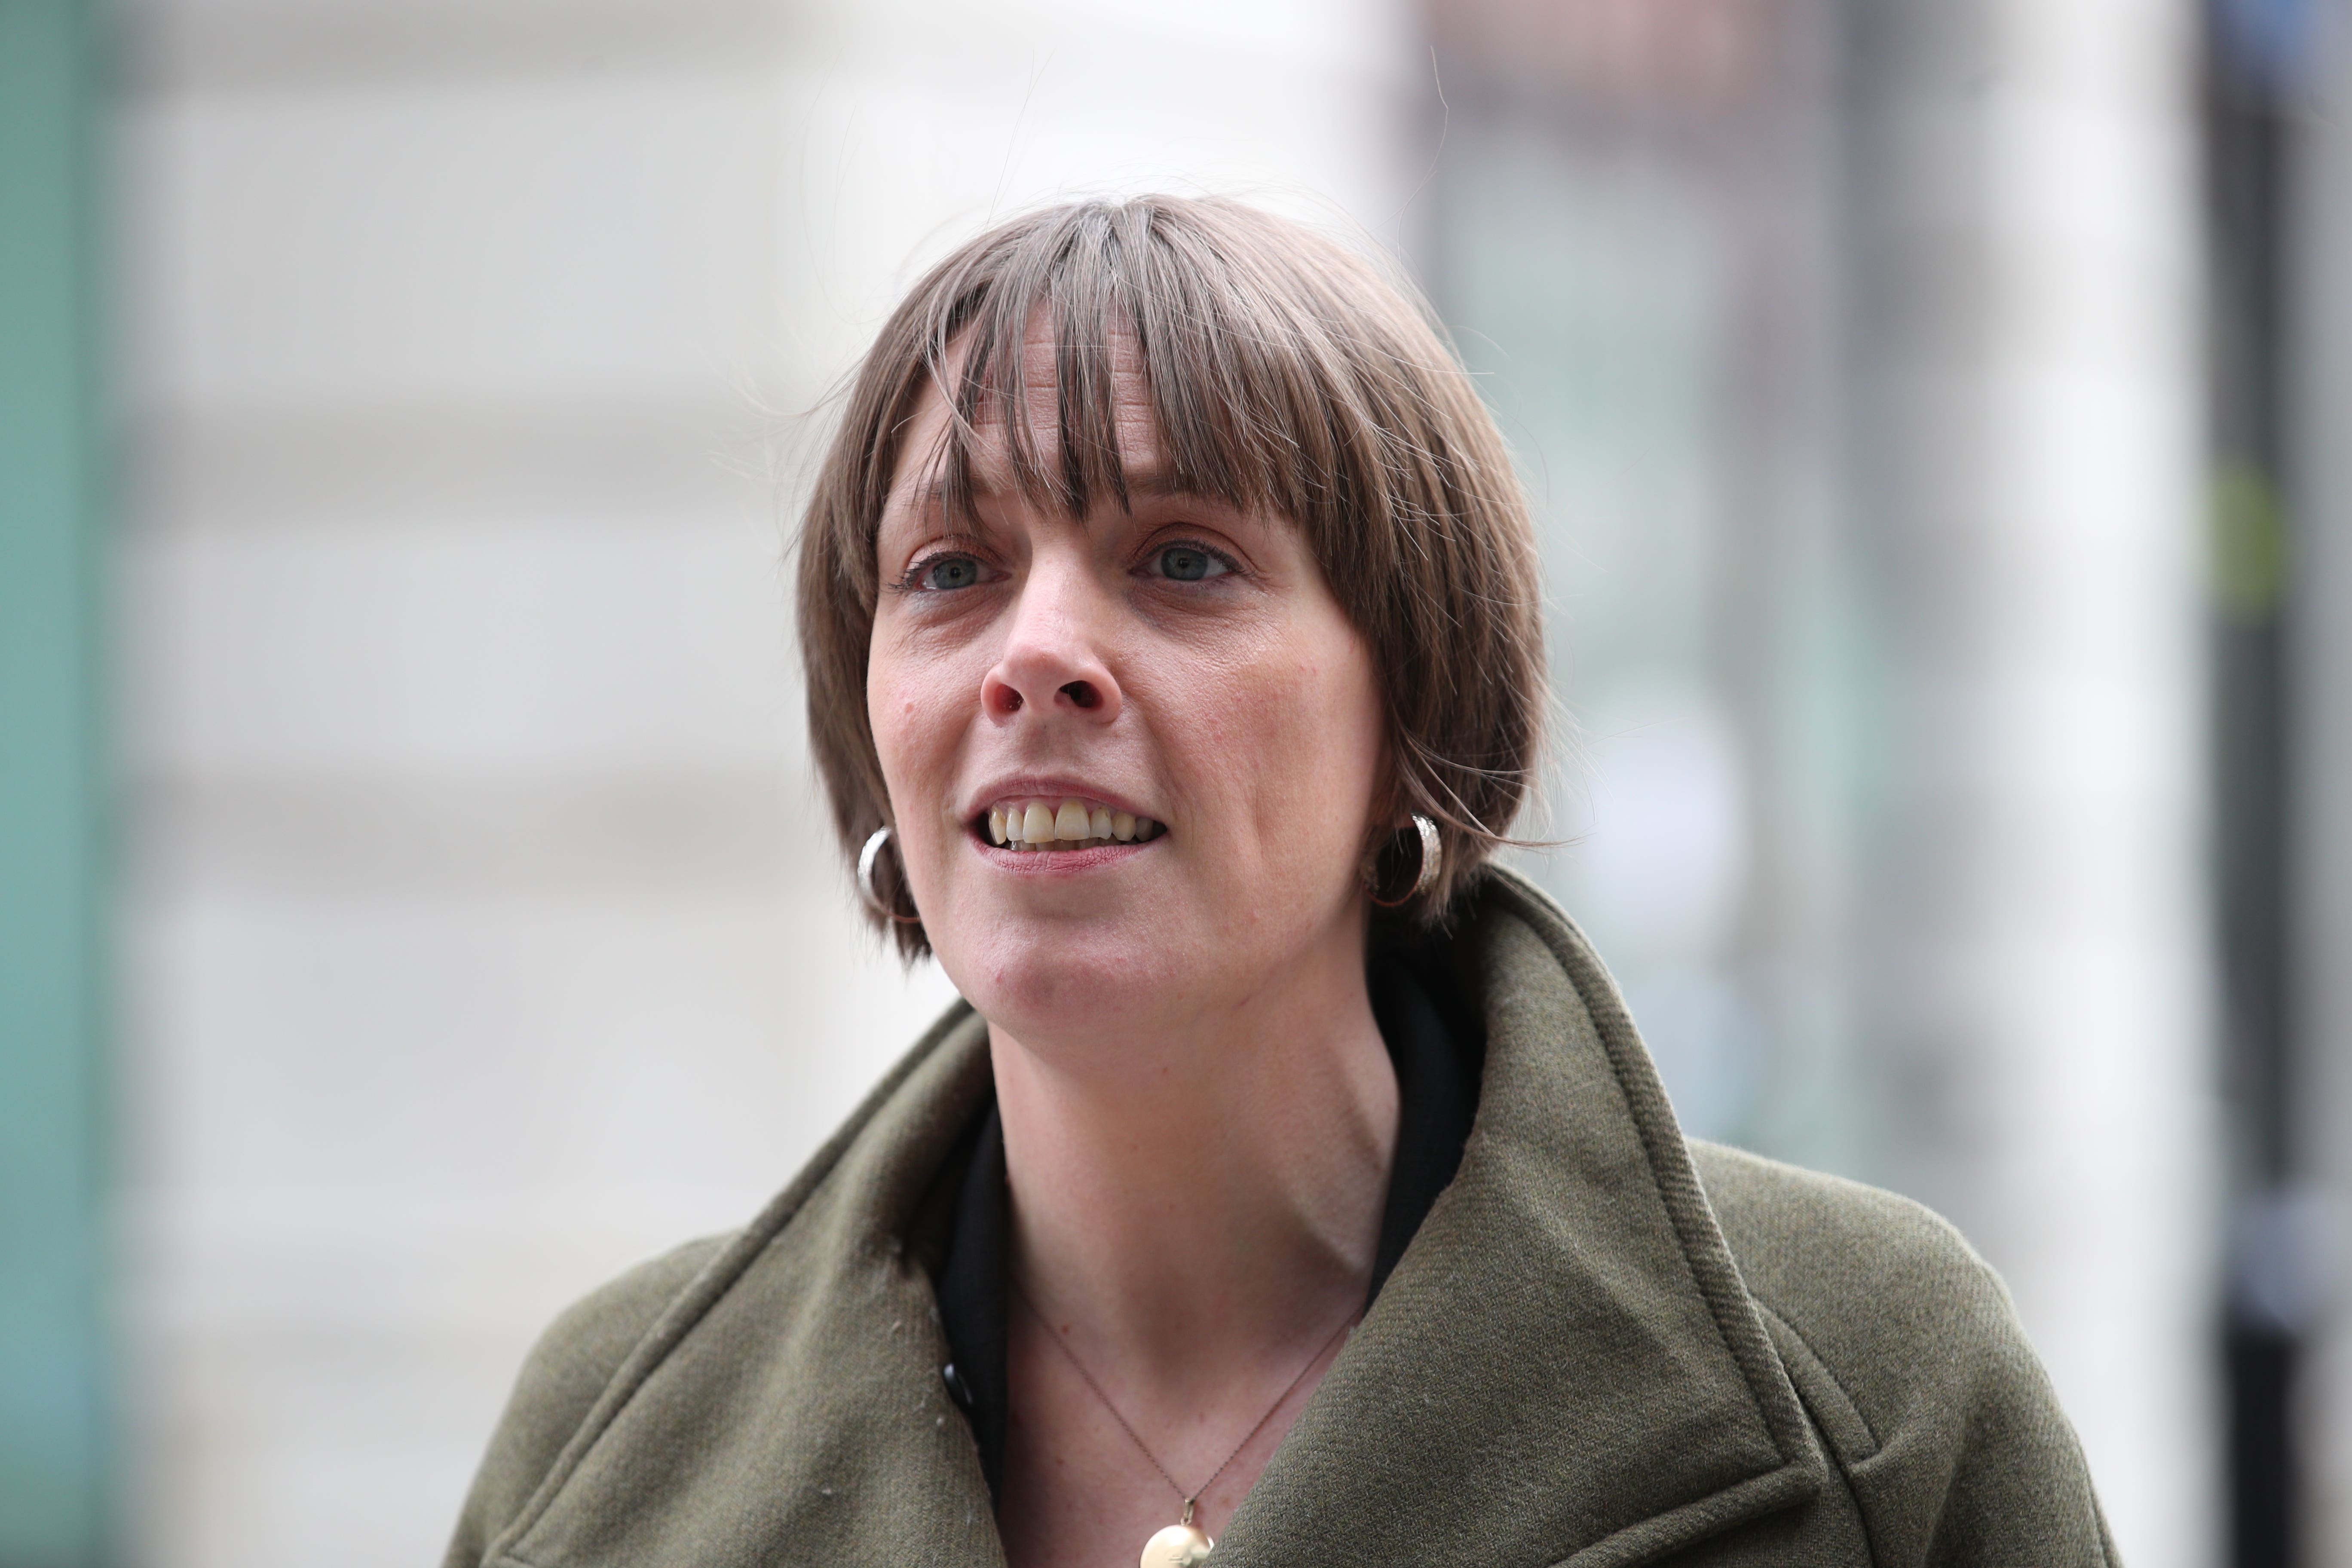 Jess Phillips Phillips, the former shadow minister for domestic violence and safeguarding, took a swipe at the chancellor’s child benefit announcement on social media